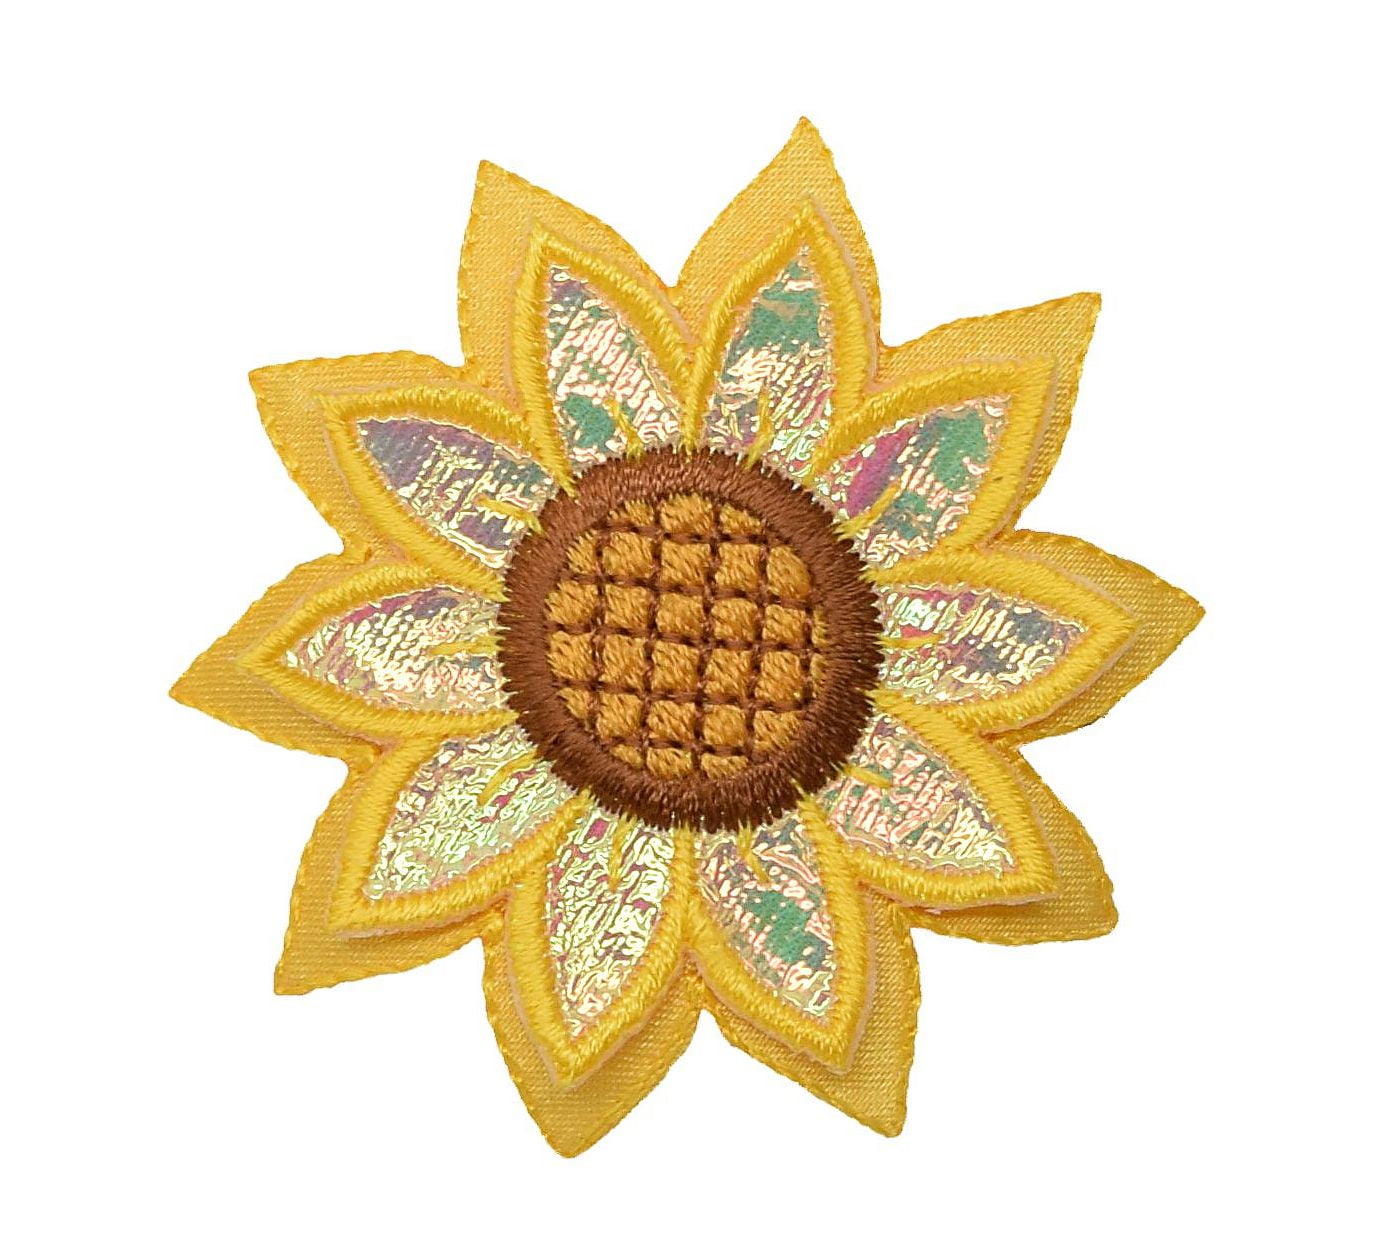 Yalulu 10Pcs Sunflower Embroidered Patches Embroidered Sticker Flower Iron On Applique Patch for Backpack and Jackets 